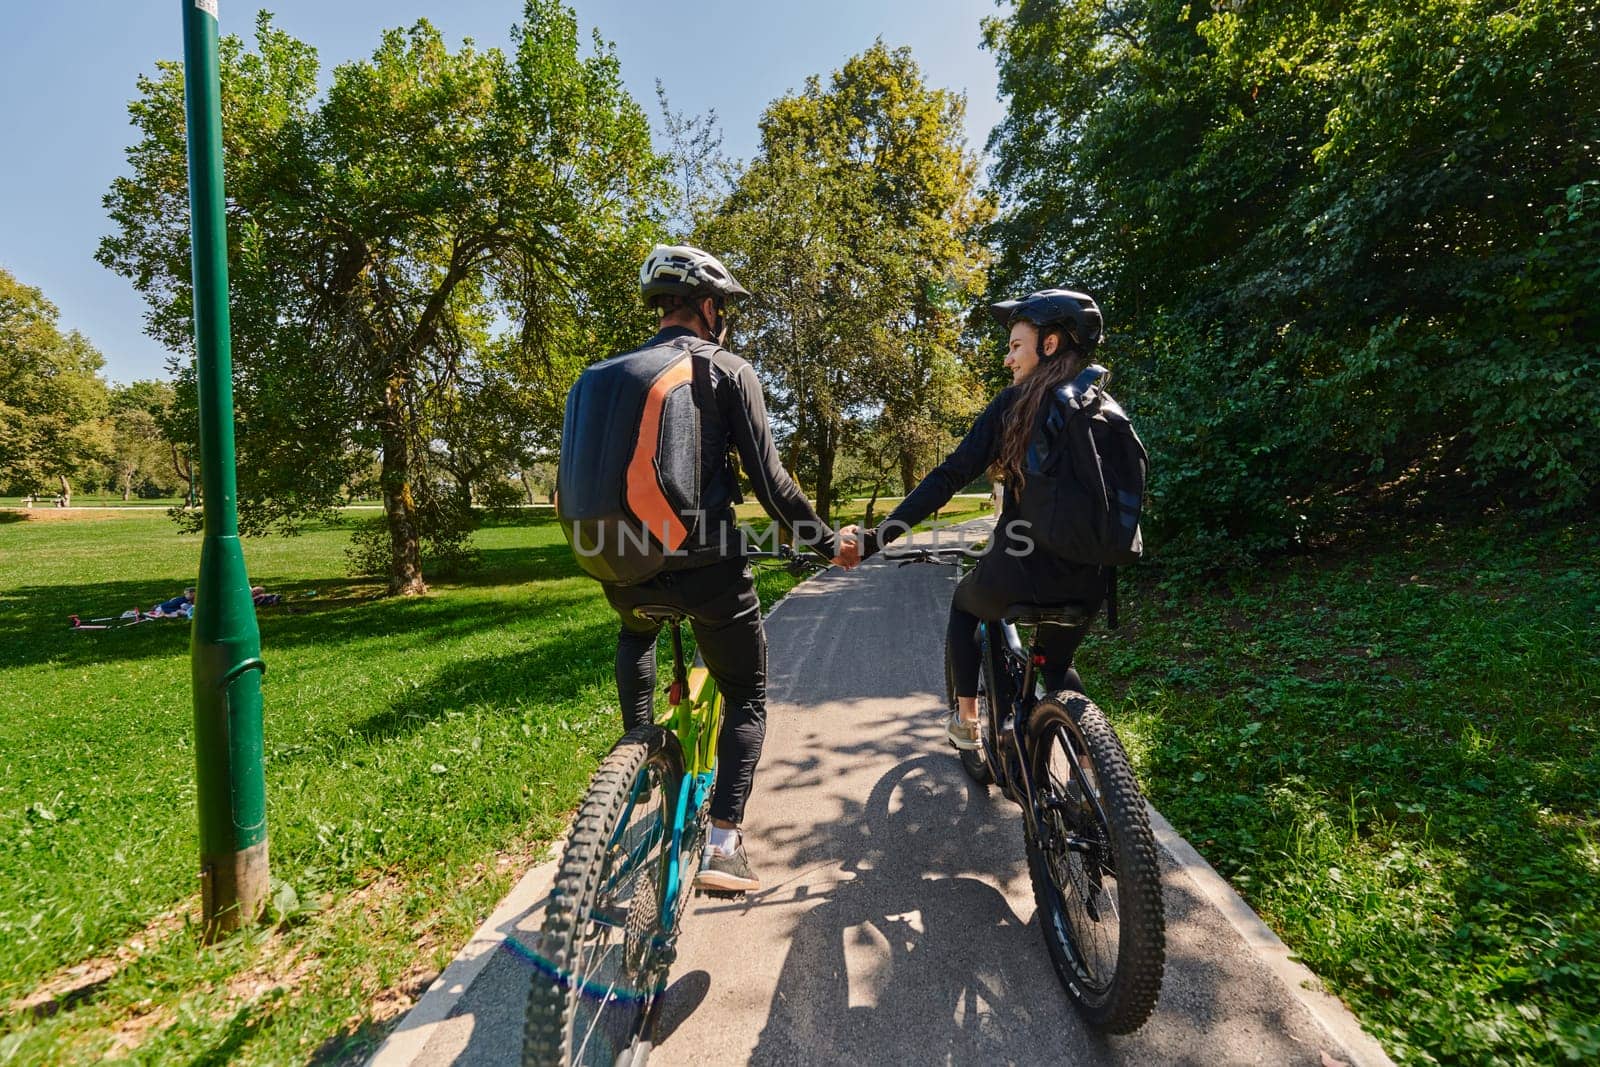 A sweet couple, adorned in cycling gear, rides their bicycles, their hands interlocked in a romantic embrace, capturing the essence of love, adventure, and joy on a sunlit path.